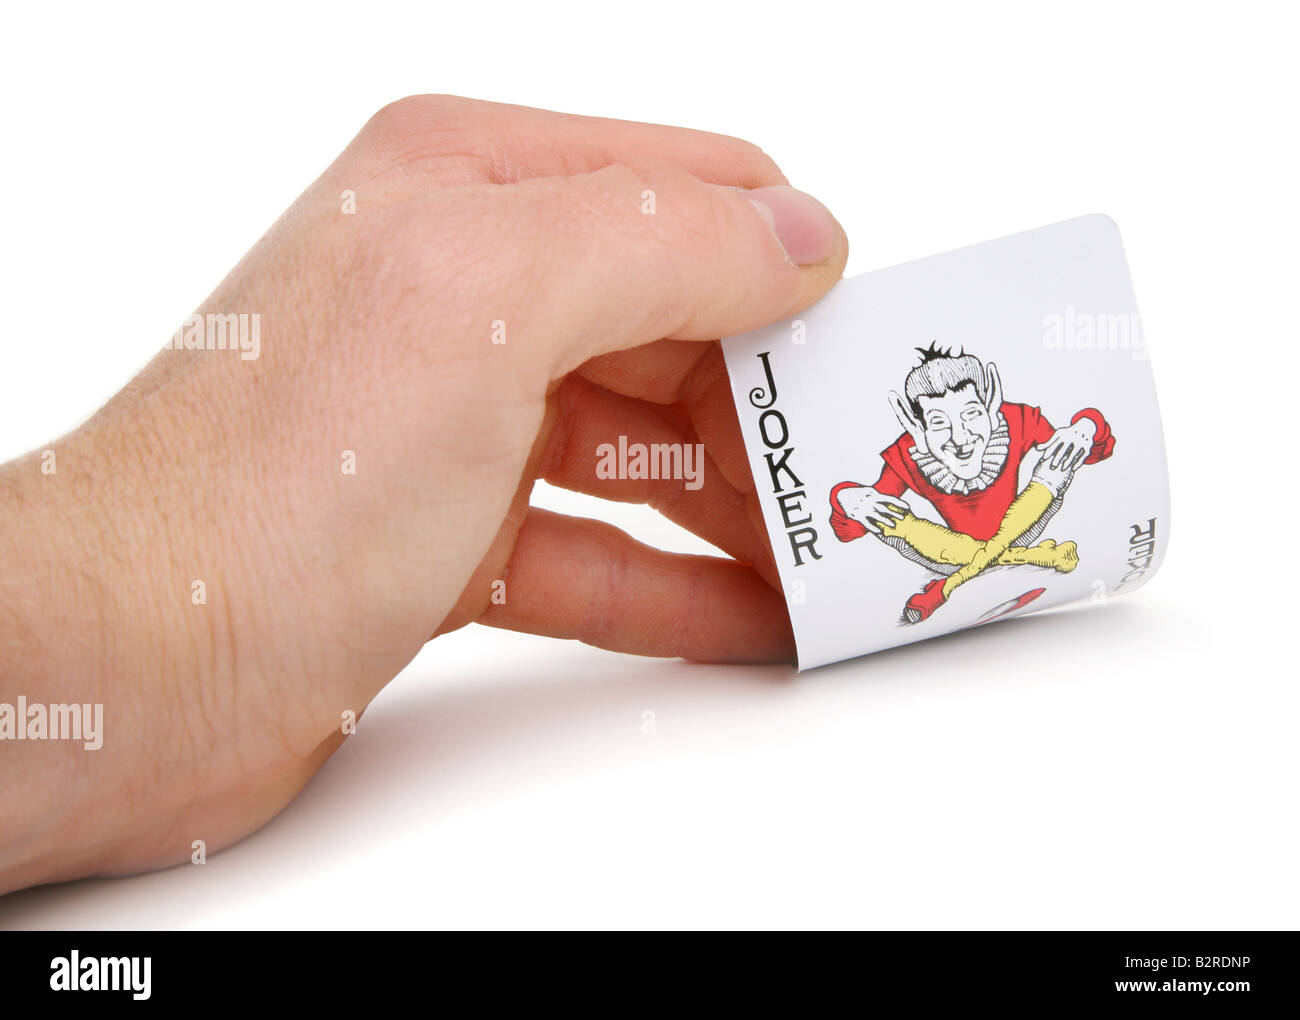 hand turning over a jokers card Stock Photo